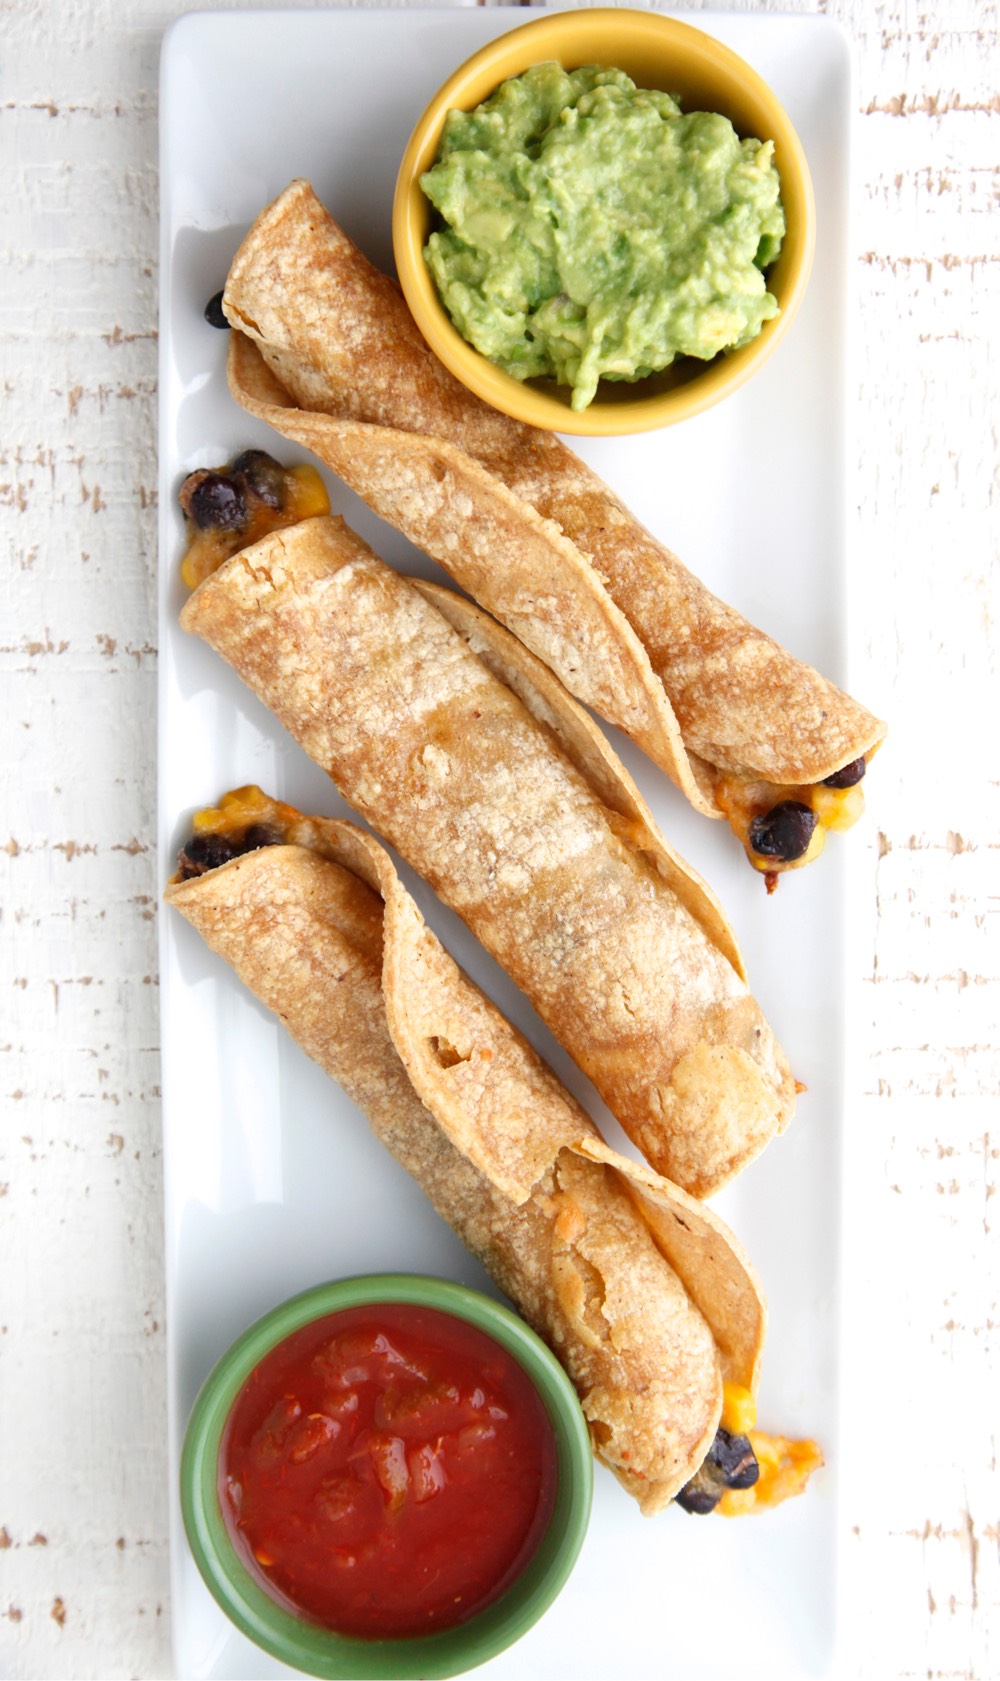 Vegetarian Baked Taquitos video from weelicious.com